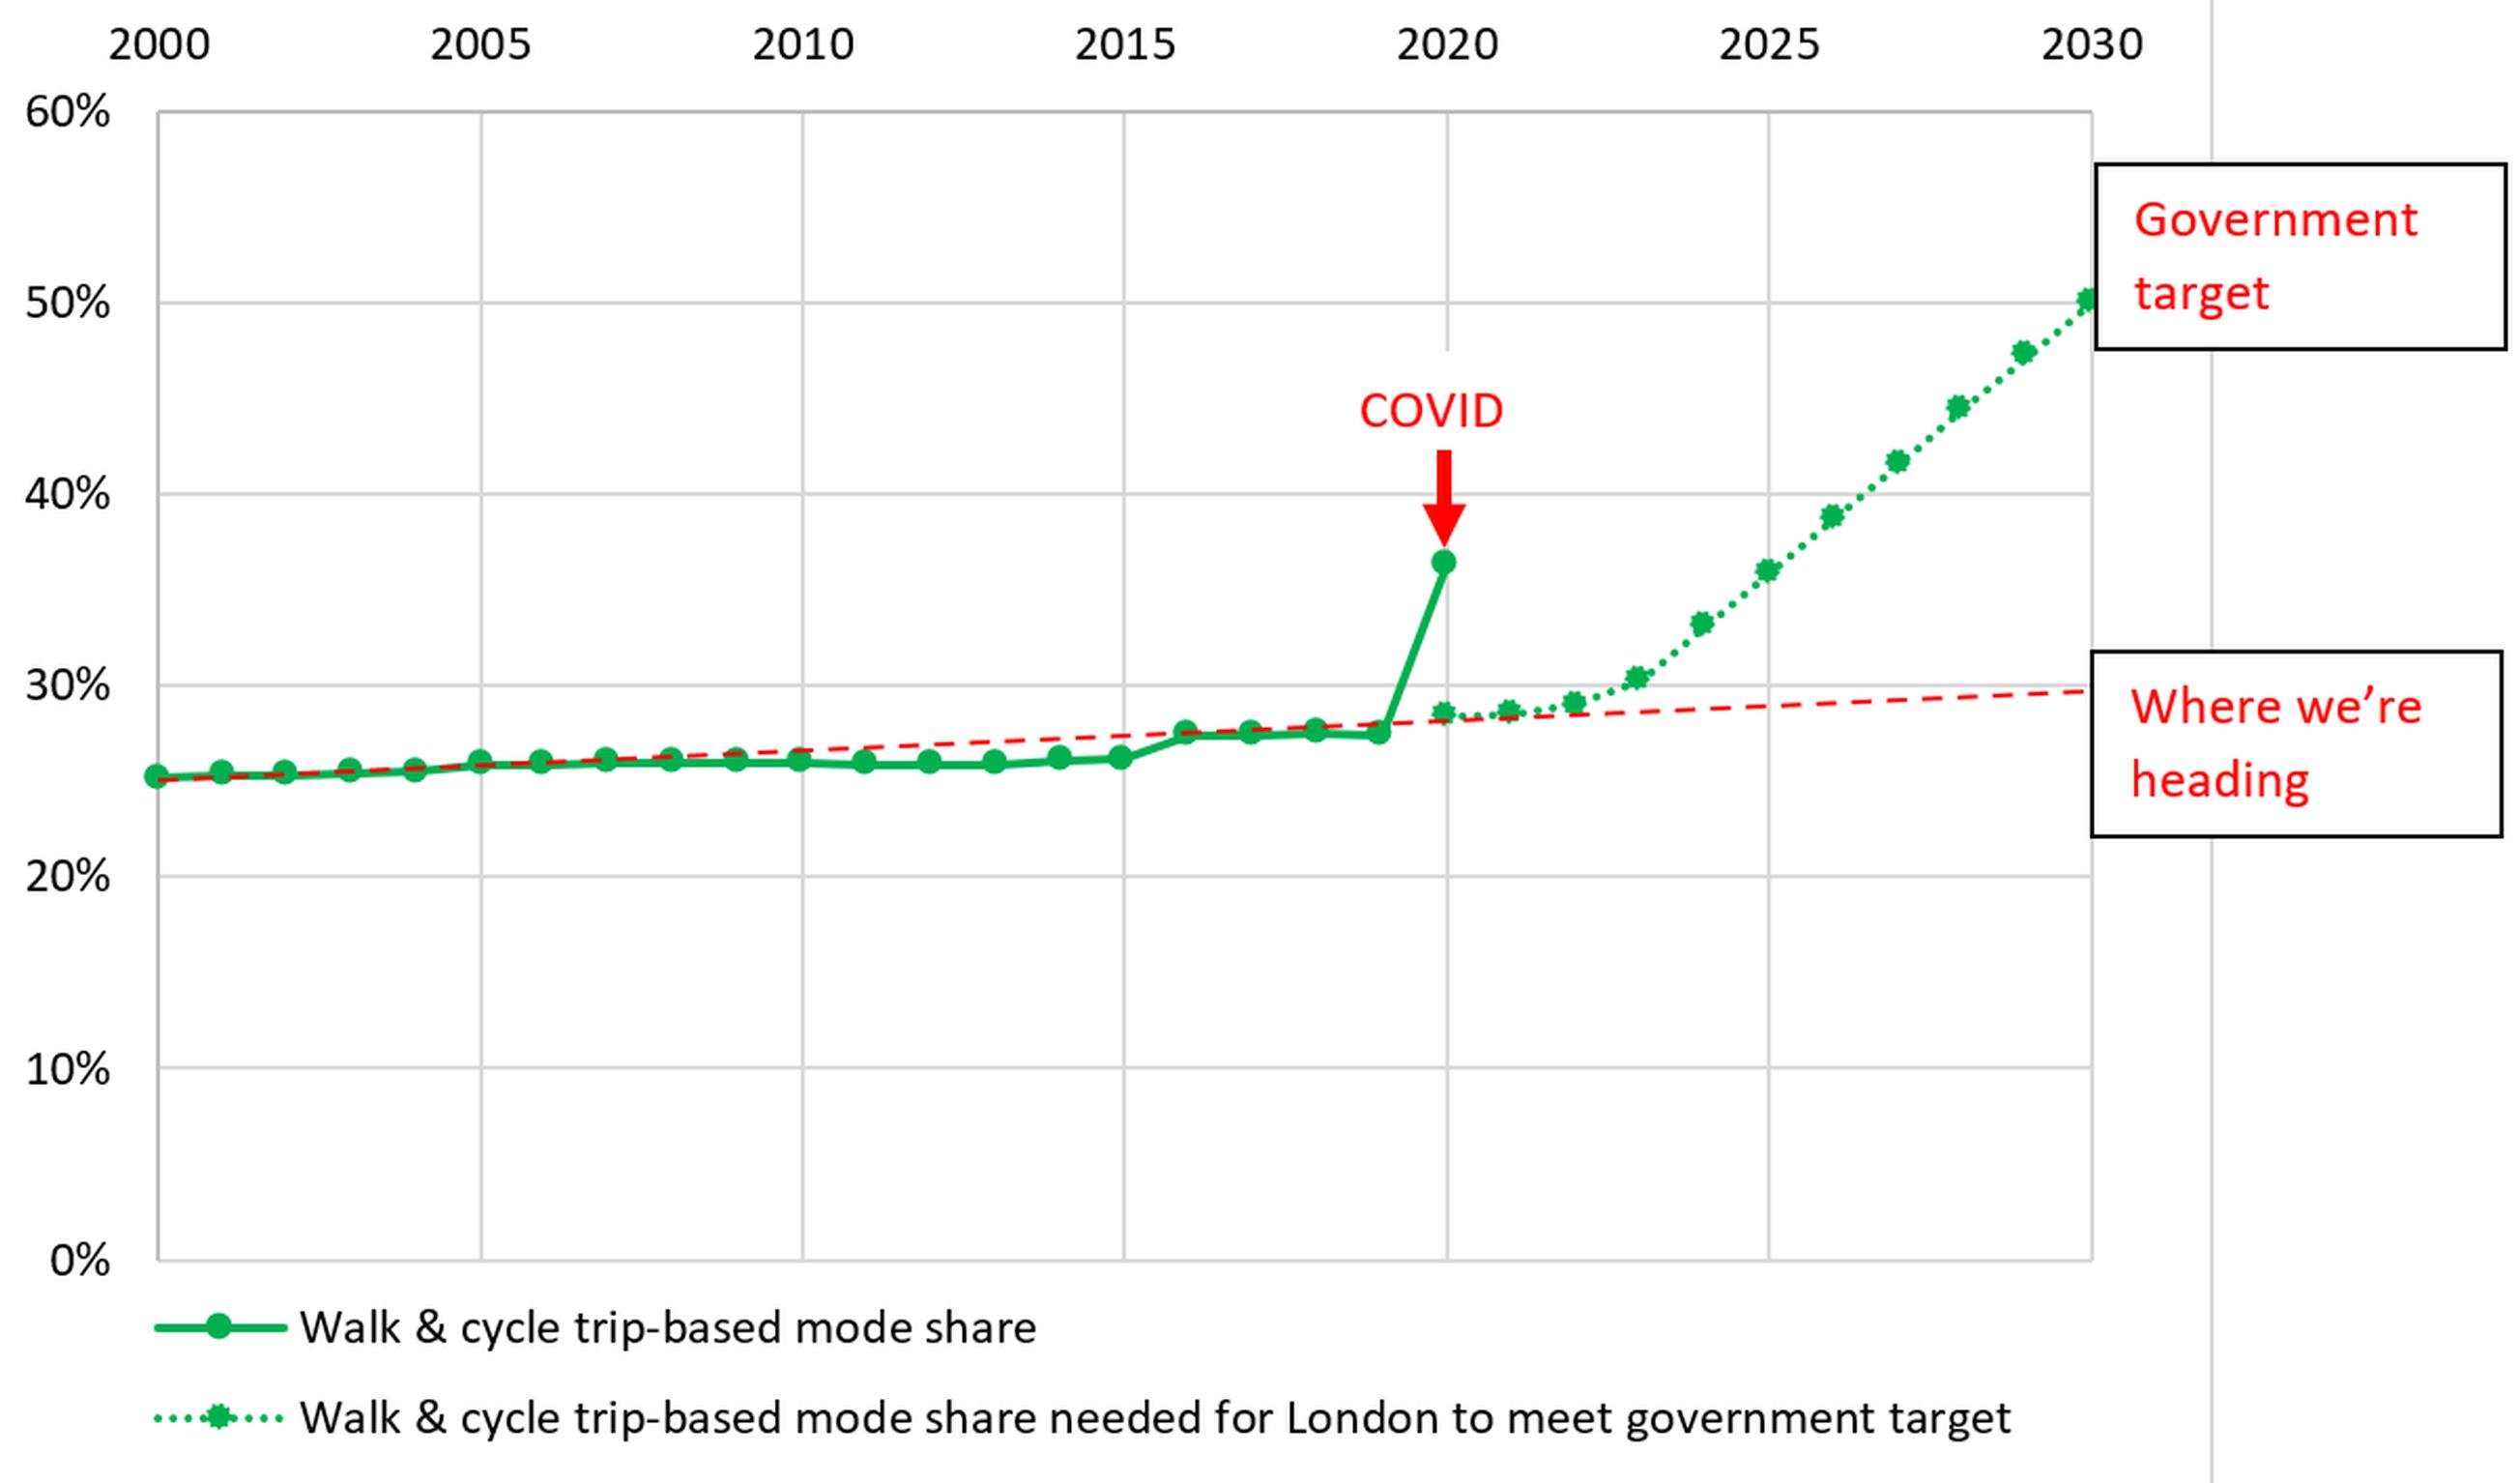 Combined walking and cycling mode share, 2000-2020, London. Source: Transport for London, Travel in London Reports 10 and 14